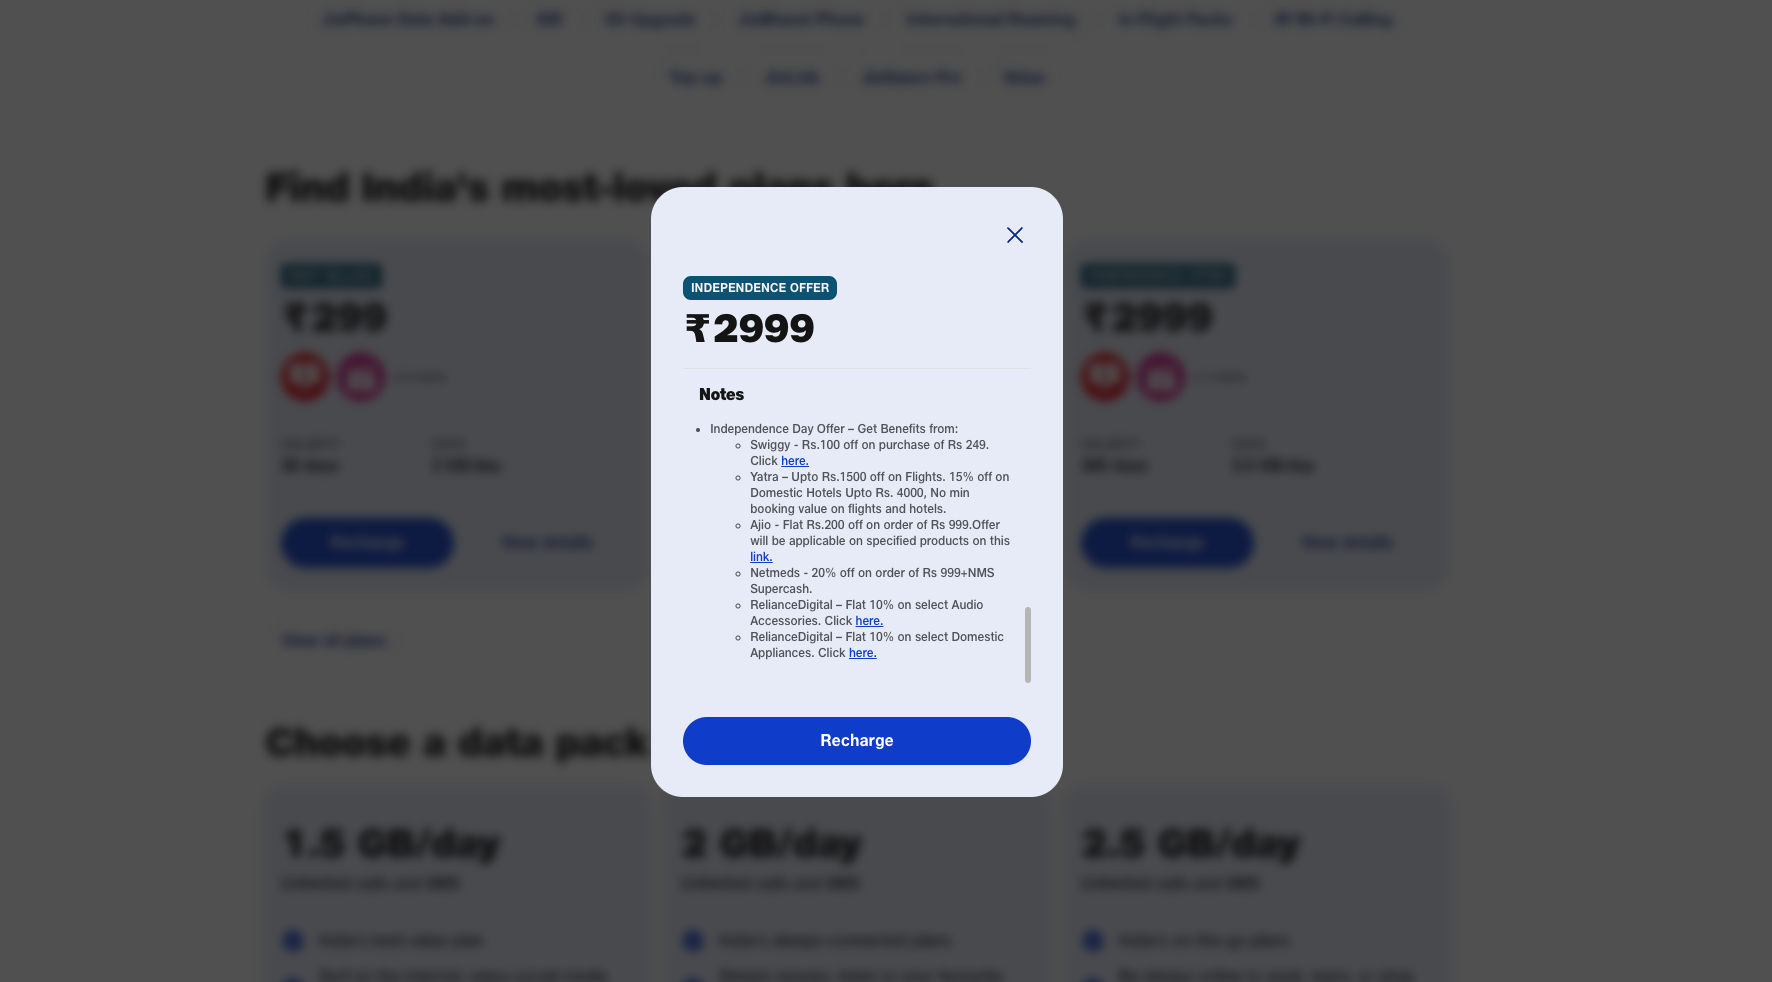 Jio has announced its Independence Day offer on Rs 2999 recharge pack.